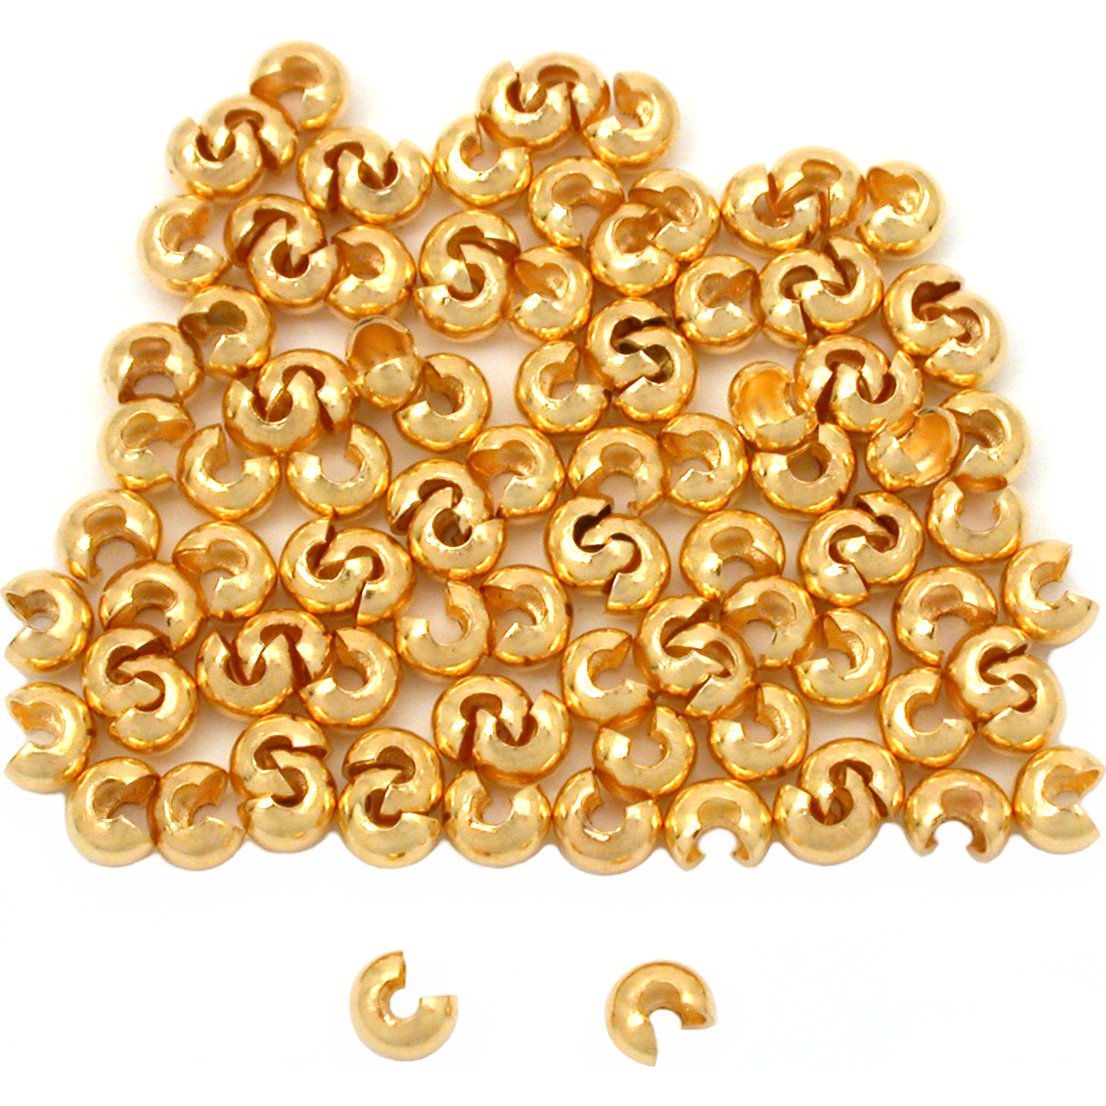 Real Gold TONE Crimp Bead Covers 3mm (144)